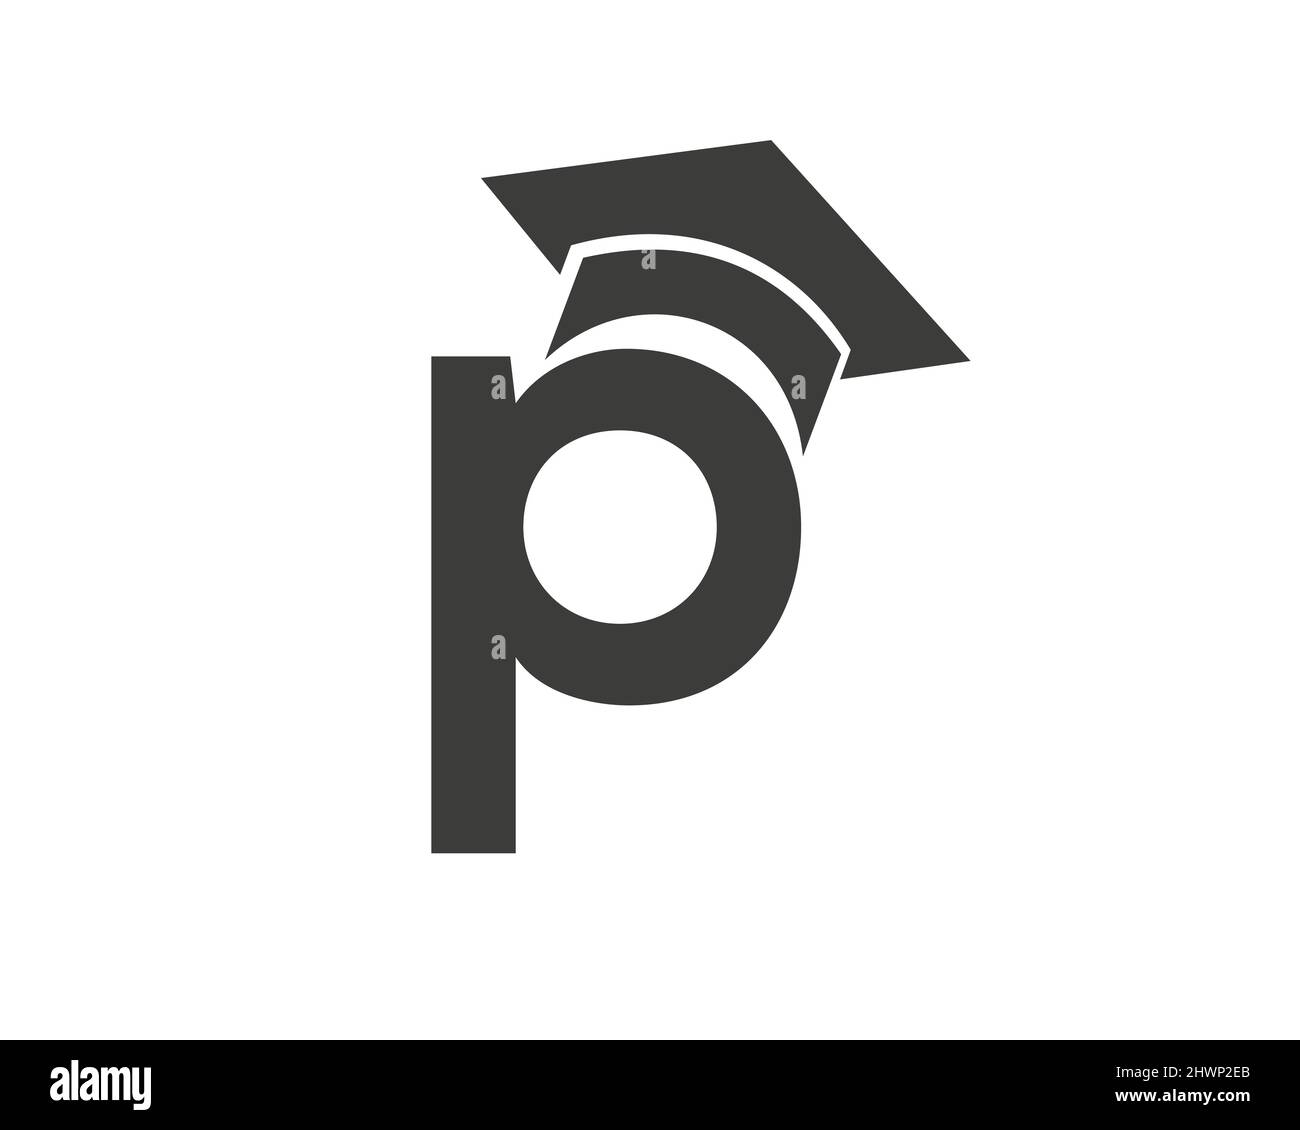 Letter P Education Logo Template. Education Logo On P Letter, Initial Education Hat Concept Template Stock Vector